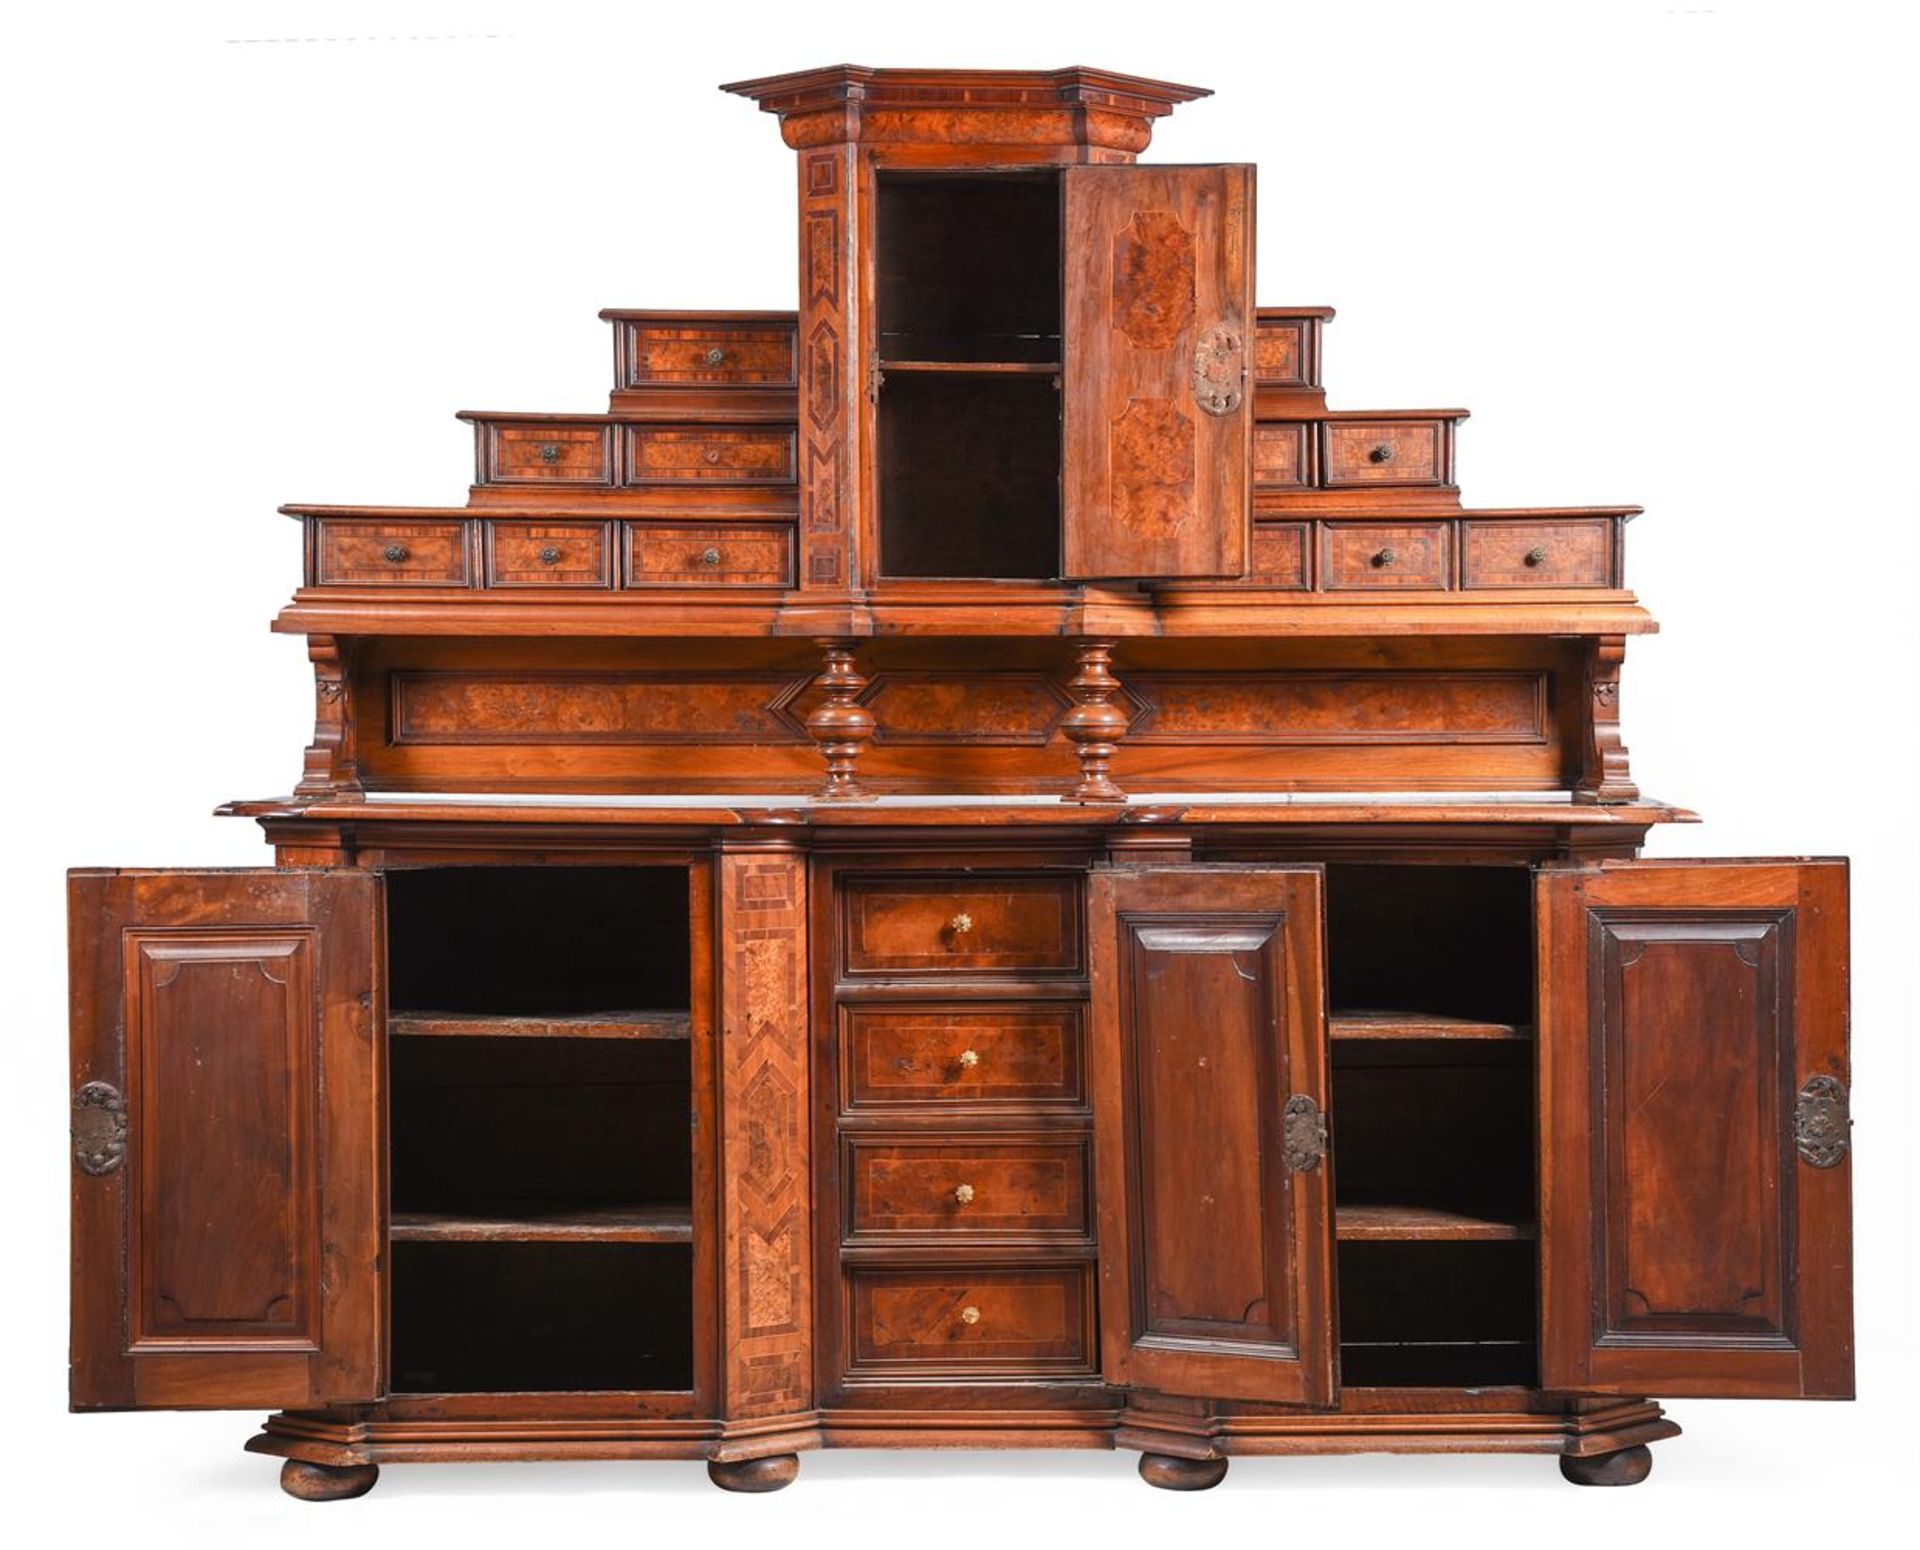 A SWISS WALNUT, BURR WALNUT AND FRUITWOOD BREAKFRONT SIDE CABINET, THIRD QUARTER 18TH CENTURY - Image 6 of 6